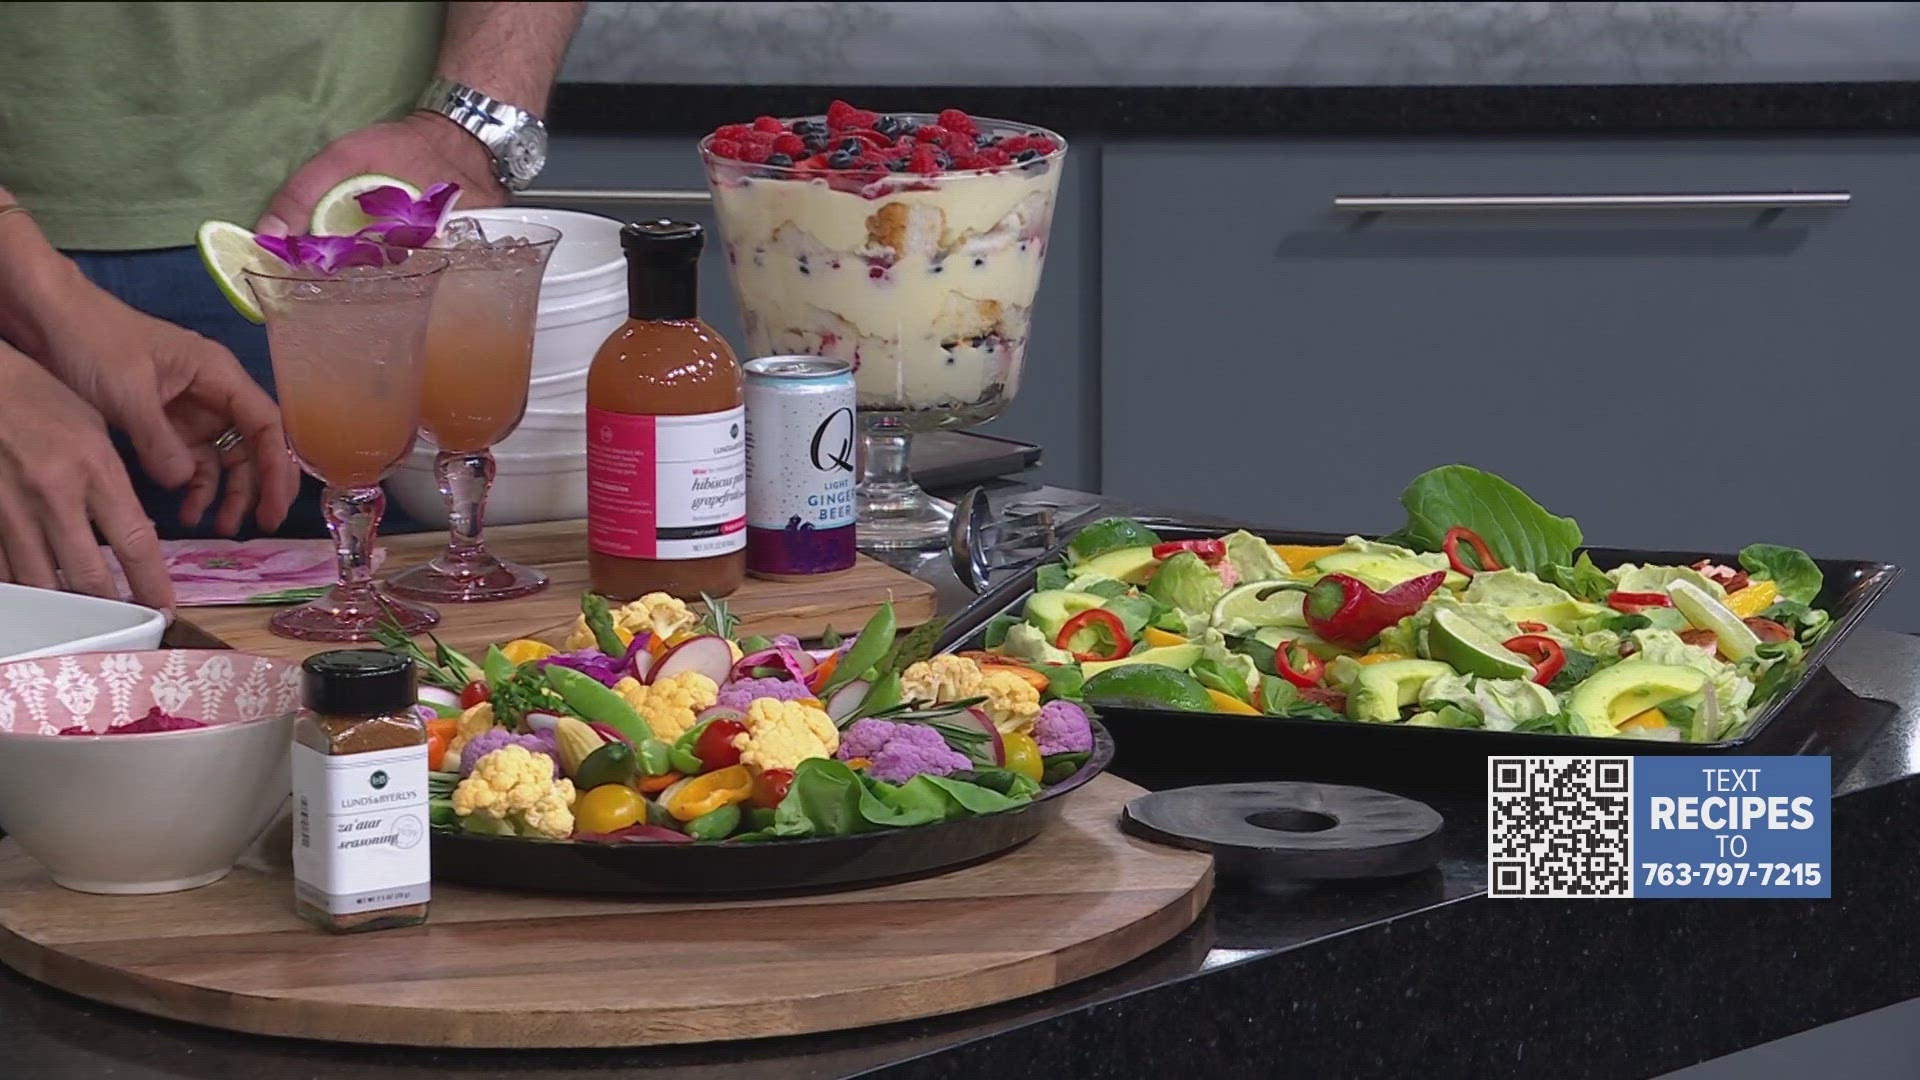 Joan Donatelle, a food expert at Lunds & Byerlys in St. Louis Park, joined KARE 11 Saturday to cook a favorite.